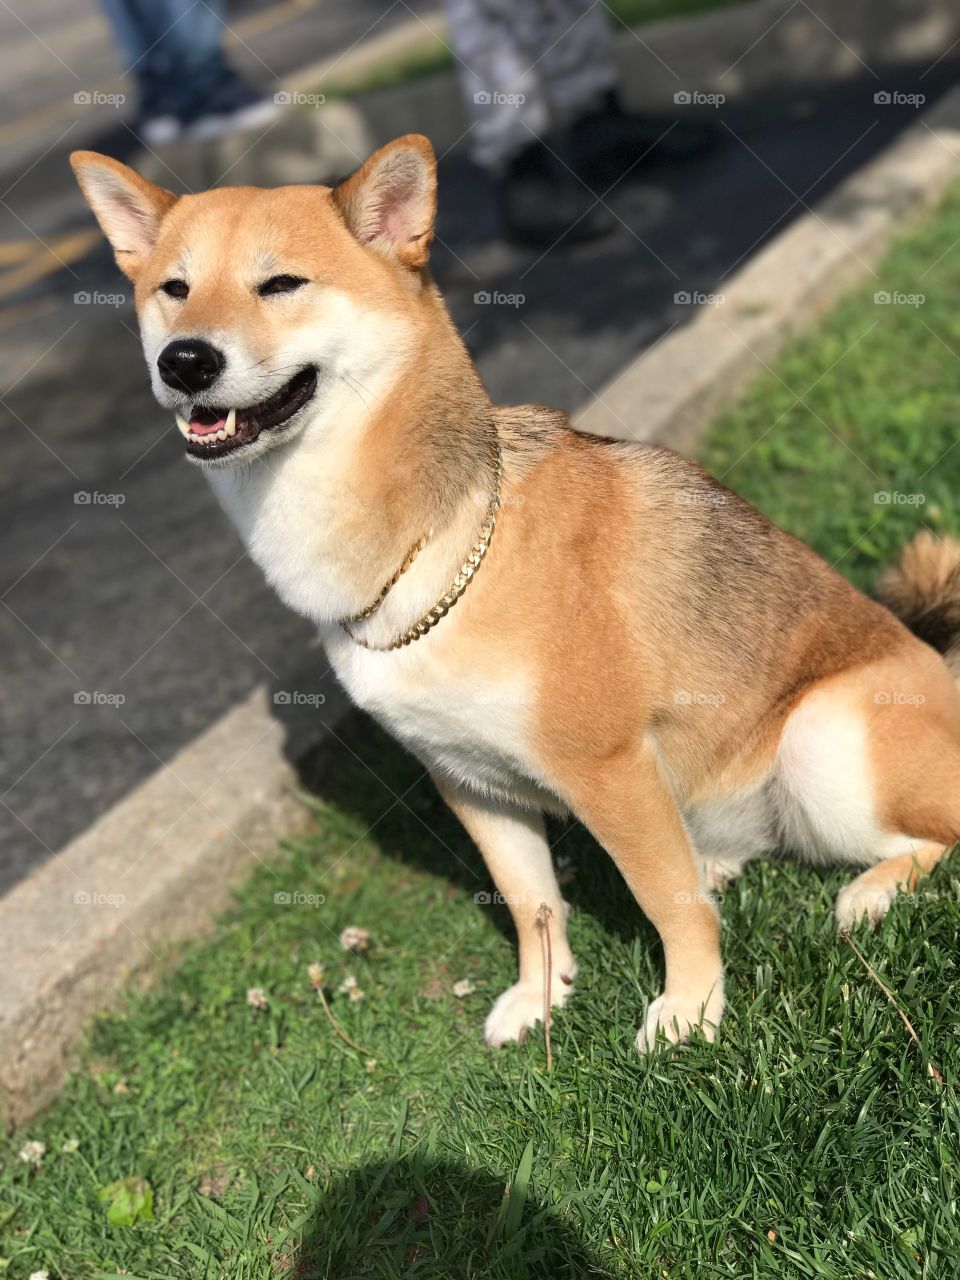 Shiba inu loves spring time and gold chains 